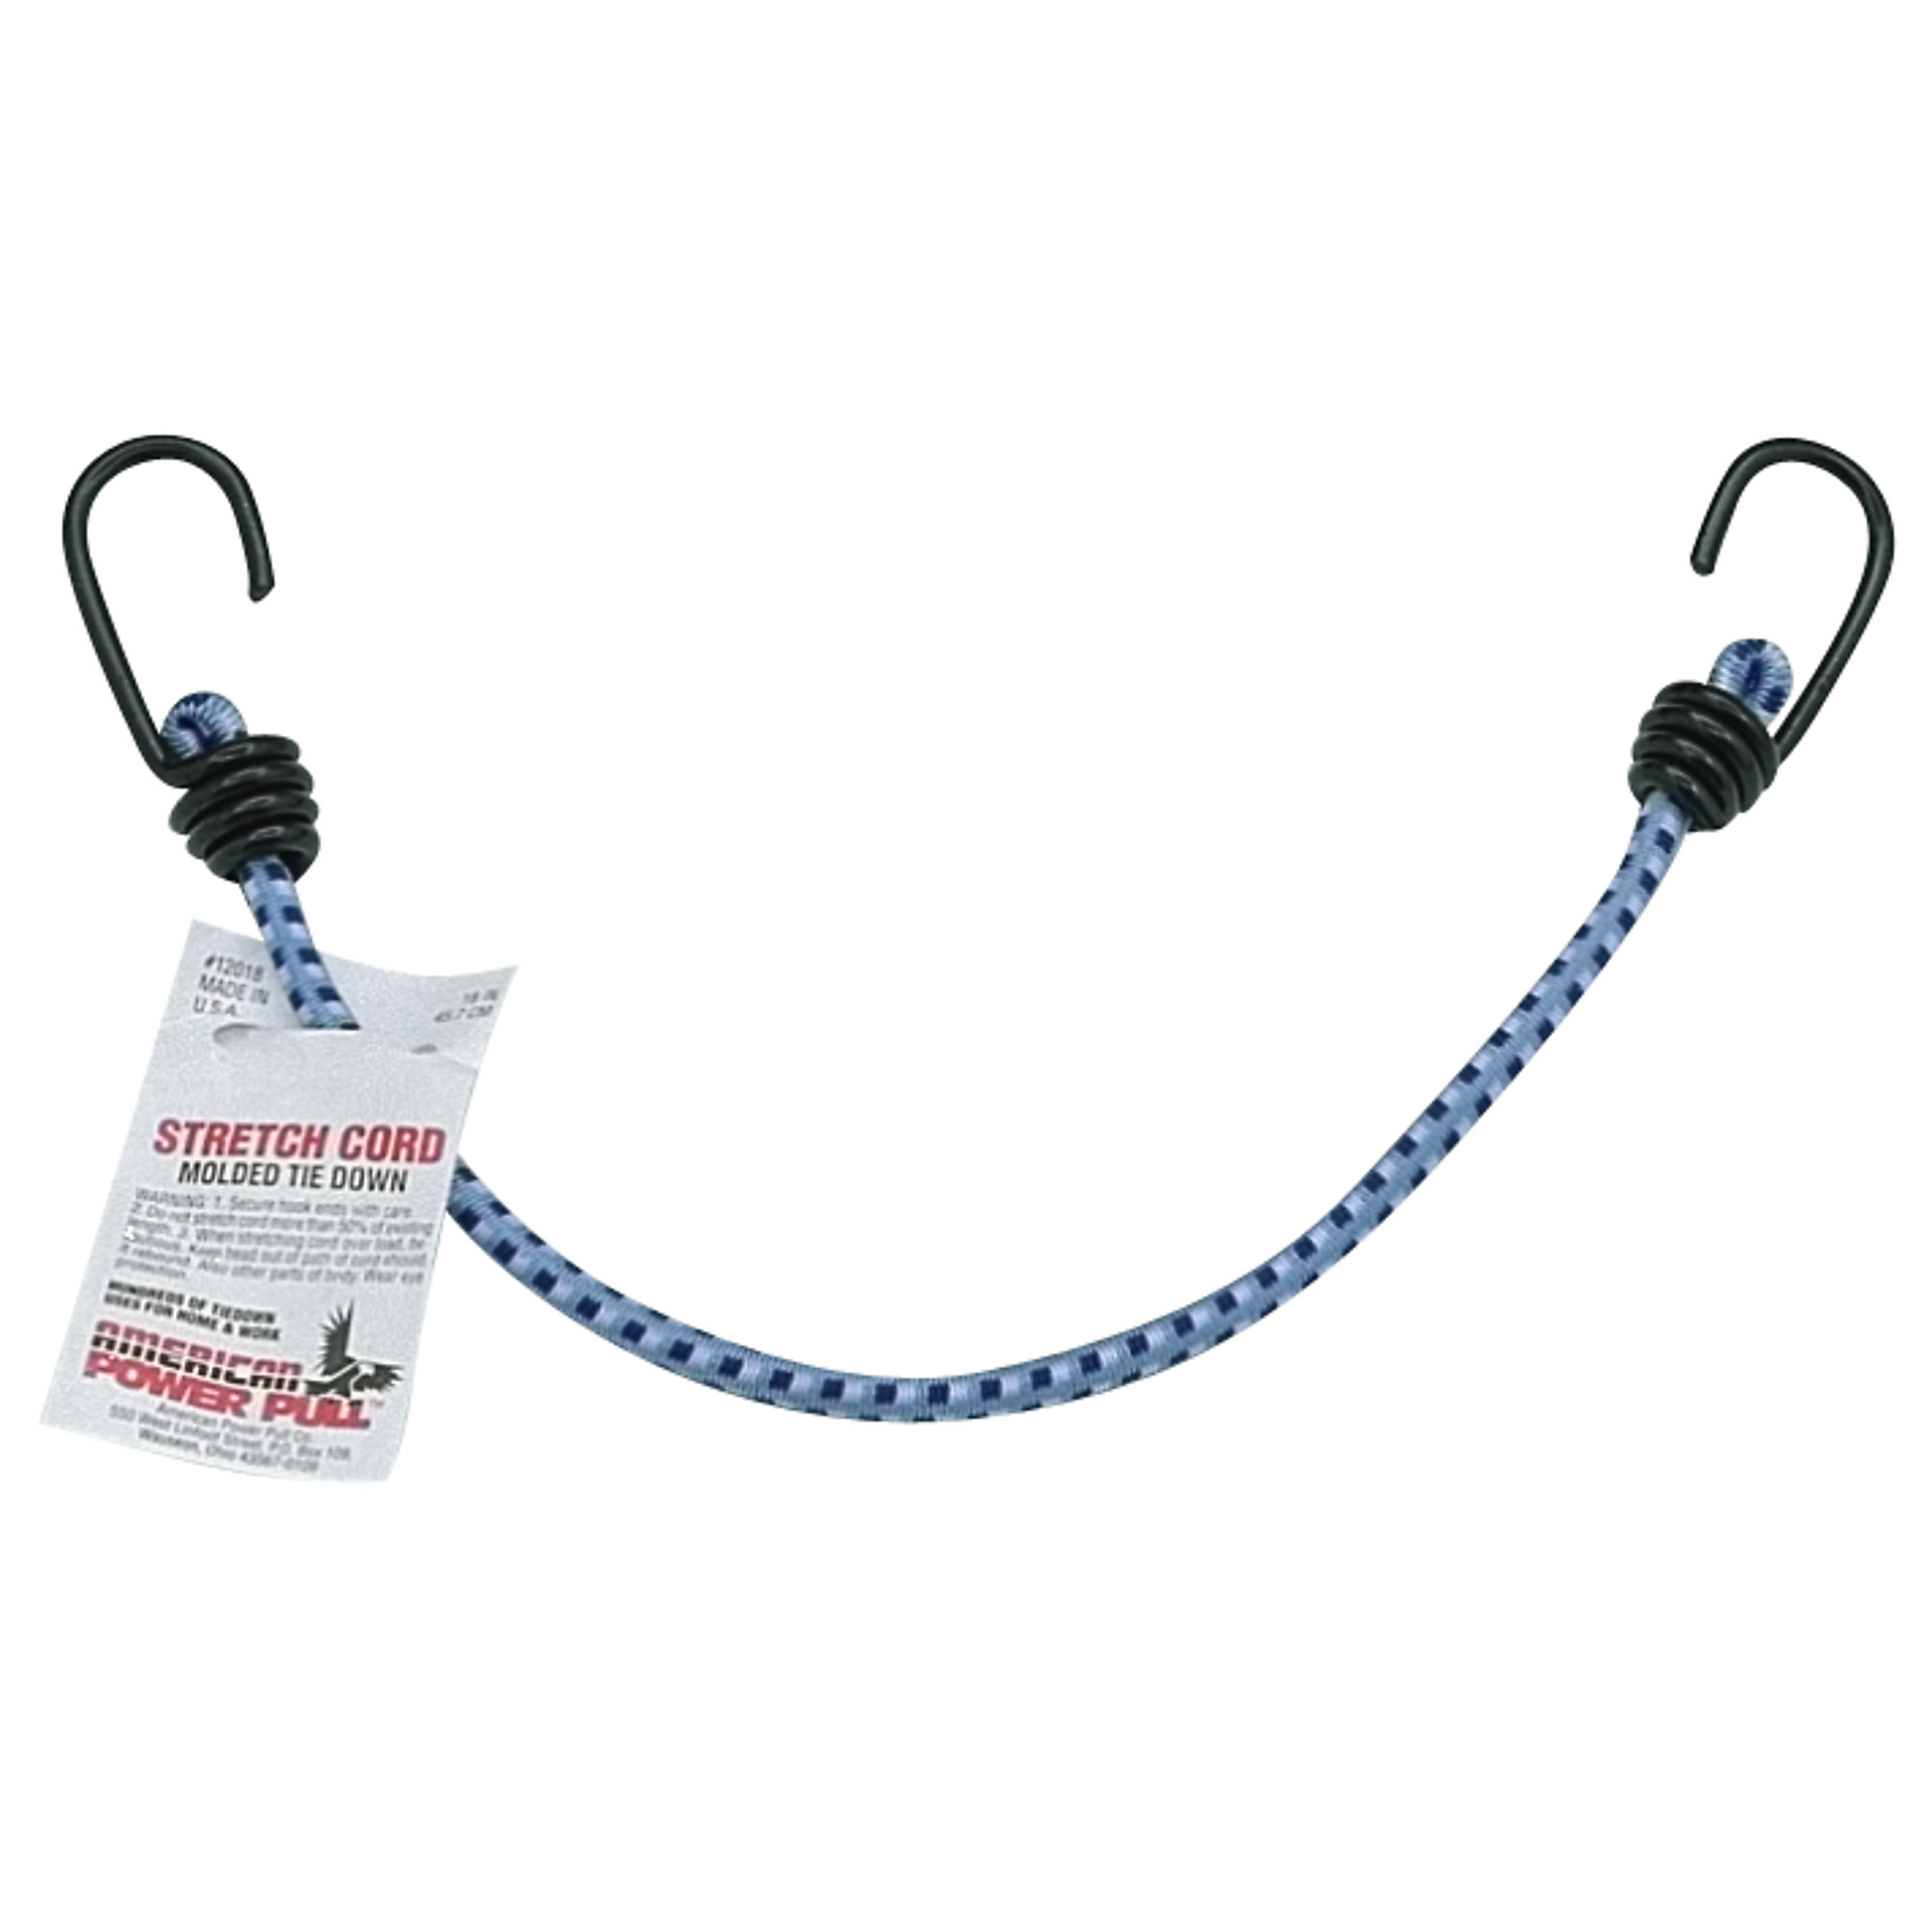 American Power Pull, 13Inch Stretch Cord, Straps (qty.) 1 Model 12013